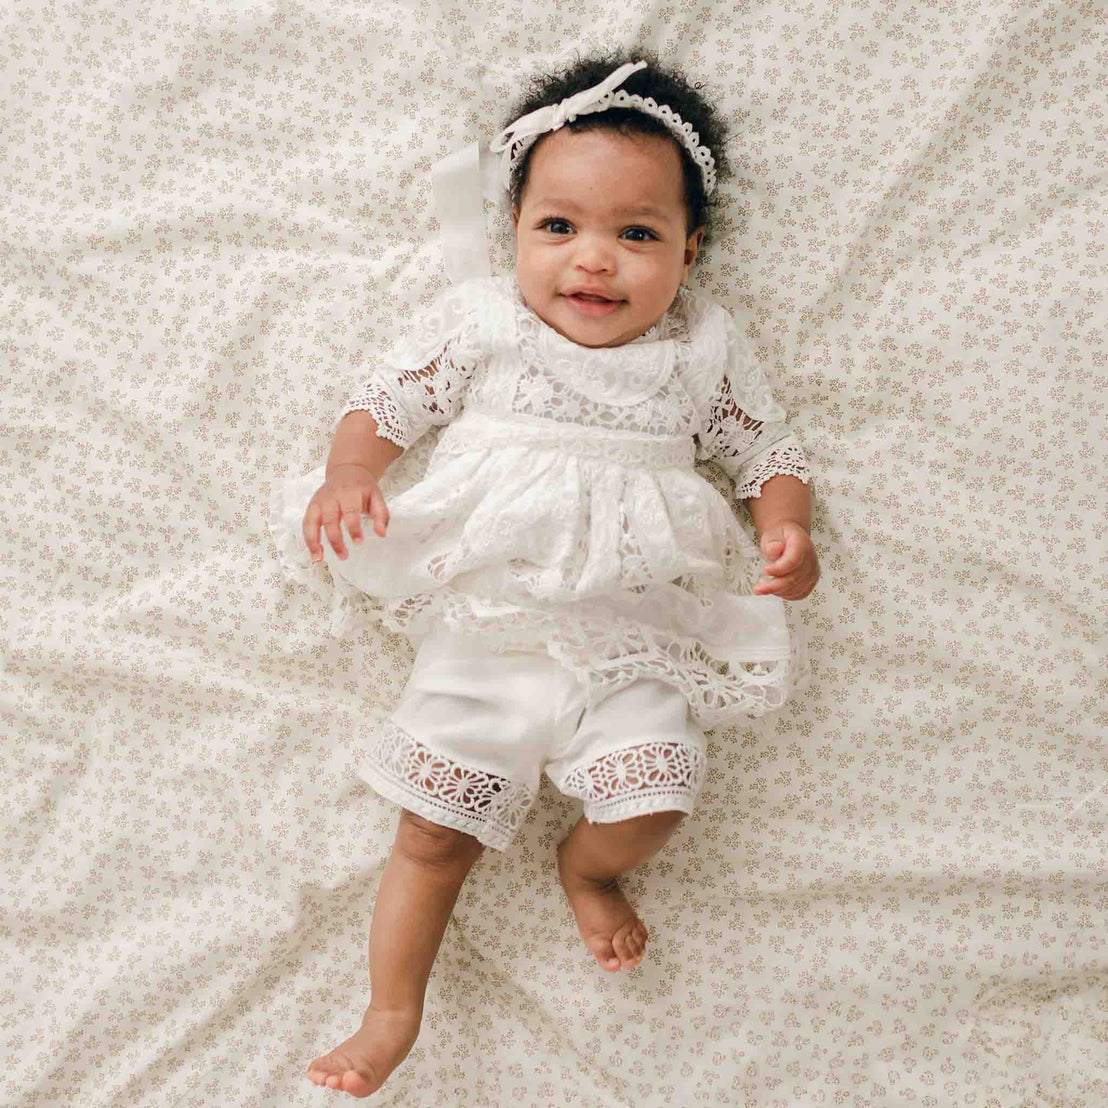 A baby is lying on a floral-patterned blanket, dressed in the stunning Adeline Lace Dress & Bloomers with a matching headband. Their outfit, perfect for any special occasion like a christening, includes a lace-trimmed top with a bow and 100% cotton lace-trimmed bloomers. The baby smiles while looking up.